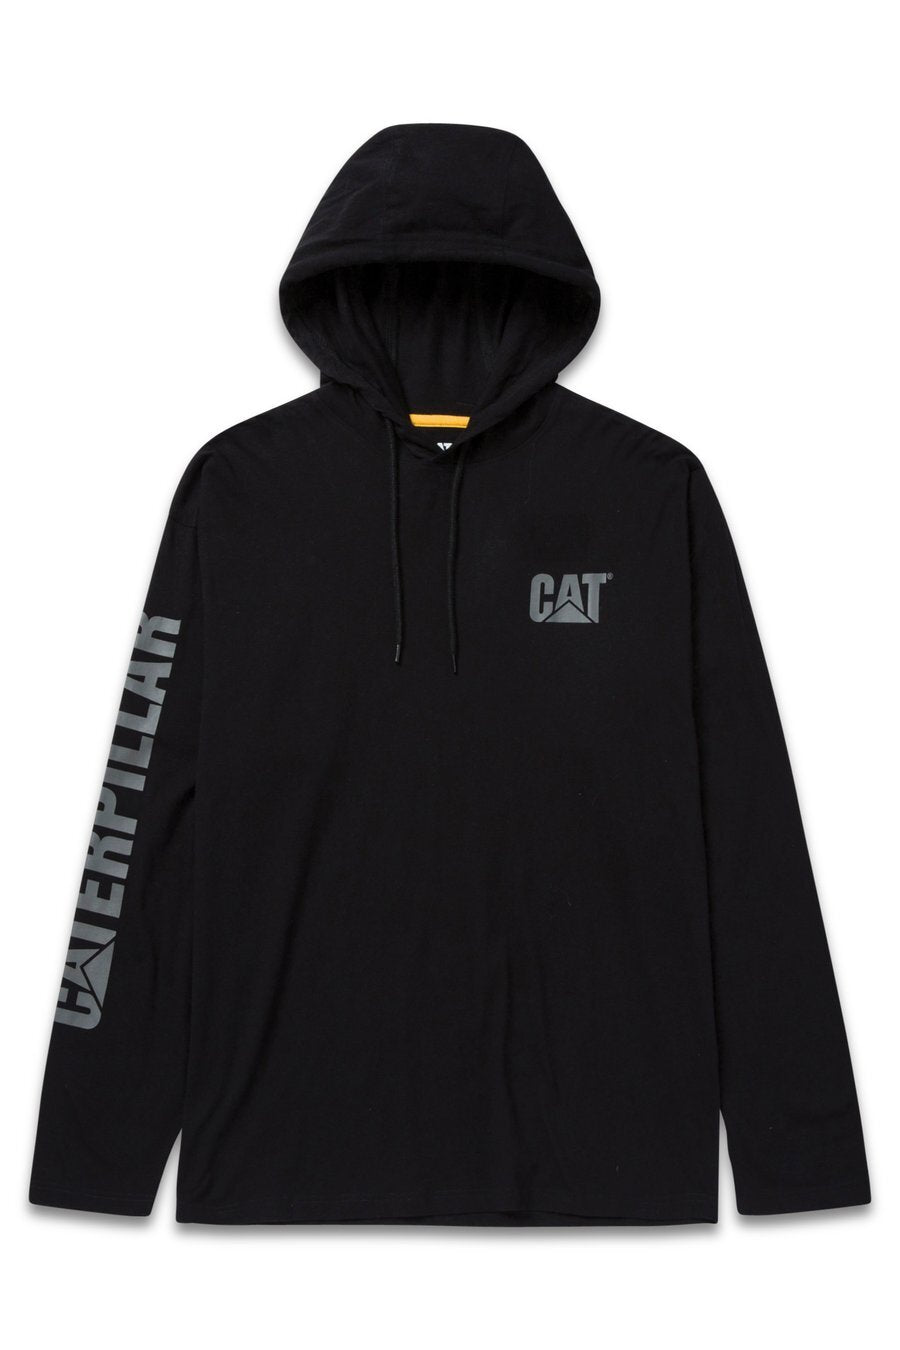 CAT Upf Hooded Banner L/S Tees